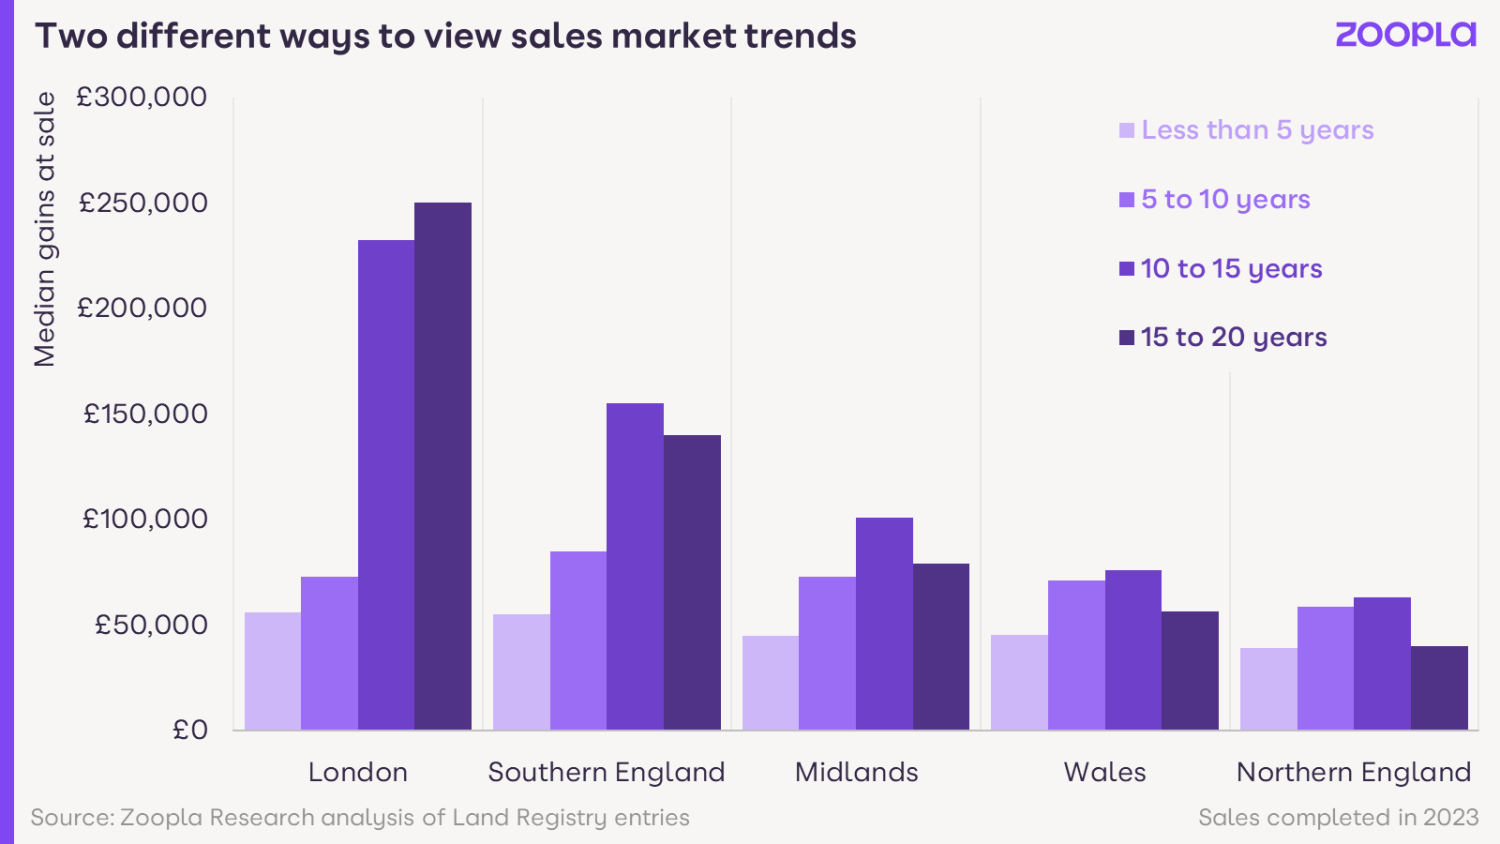 A graph showing two different ways to view sales market trends